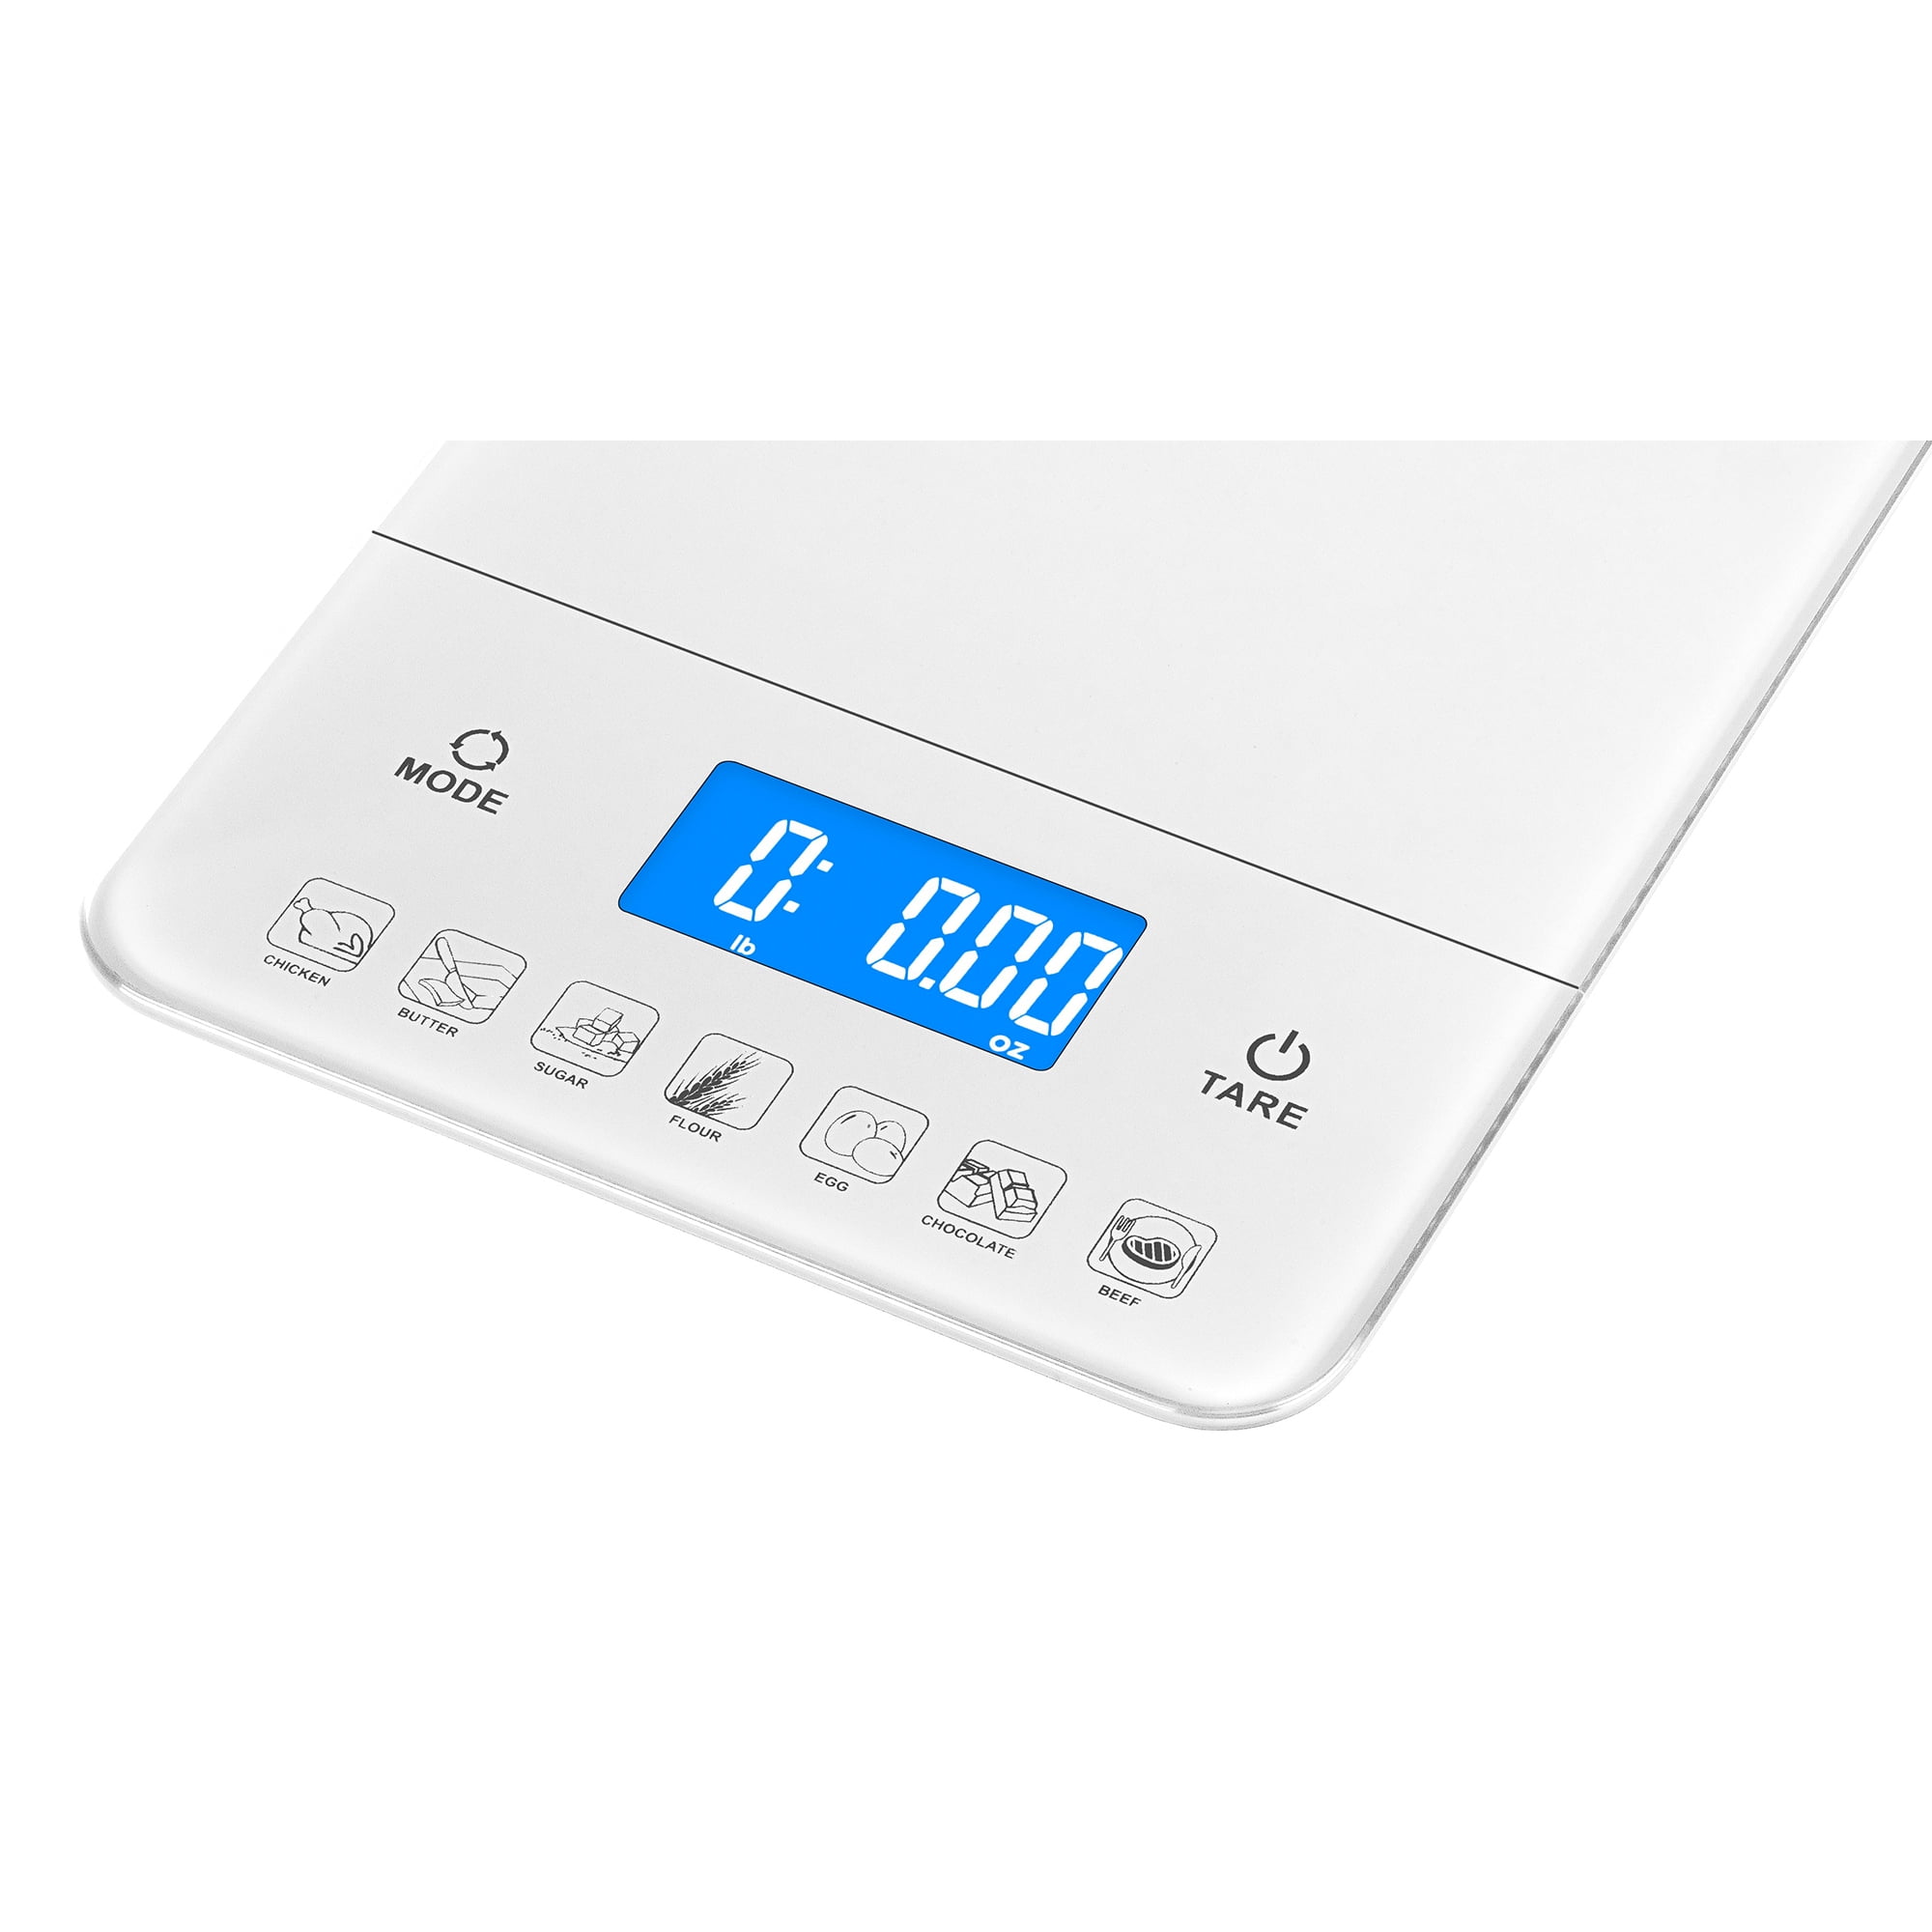 Ozeri Touch III 22 lbs. (10 kg) Digital Kitchen Scale with Calorie Counter,  in Tempered Glass 